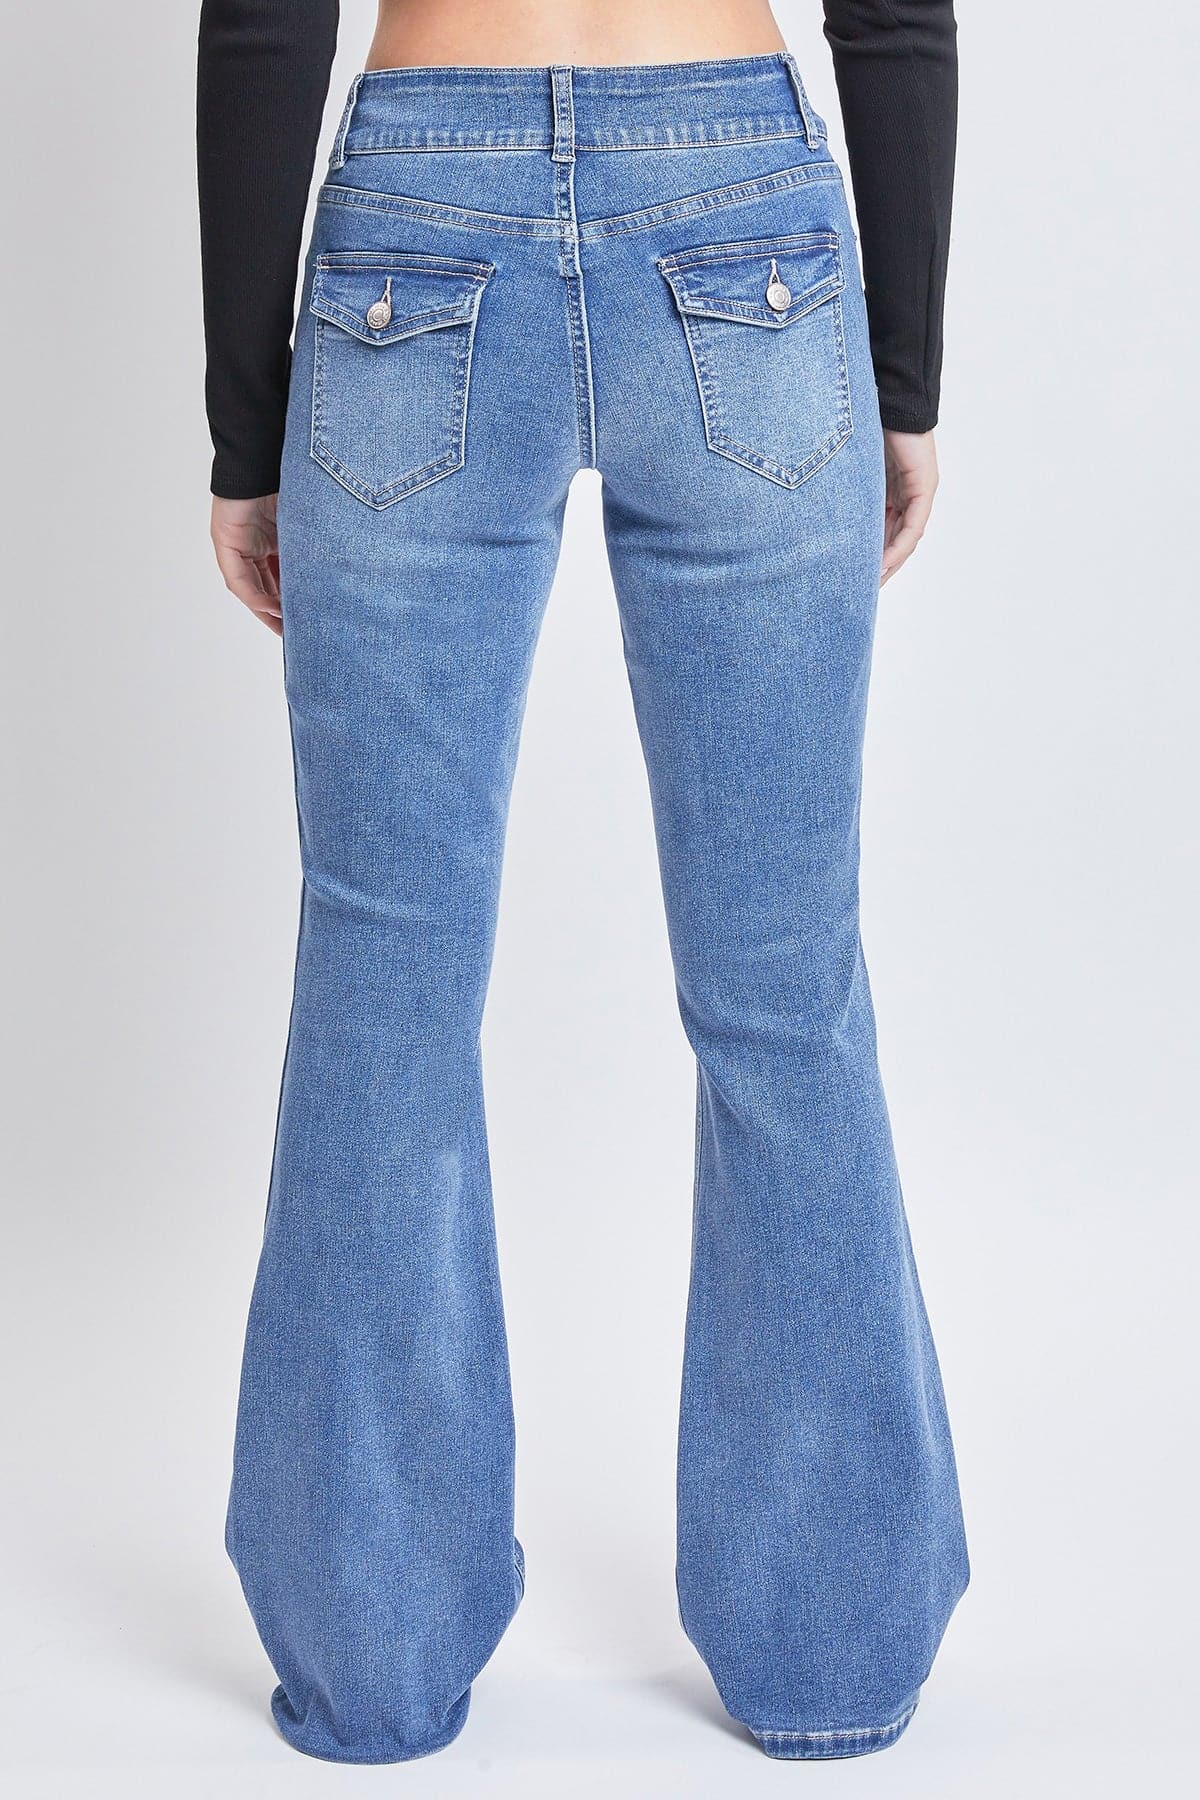 Women's Flare Jeans With Flap Back Pockets